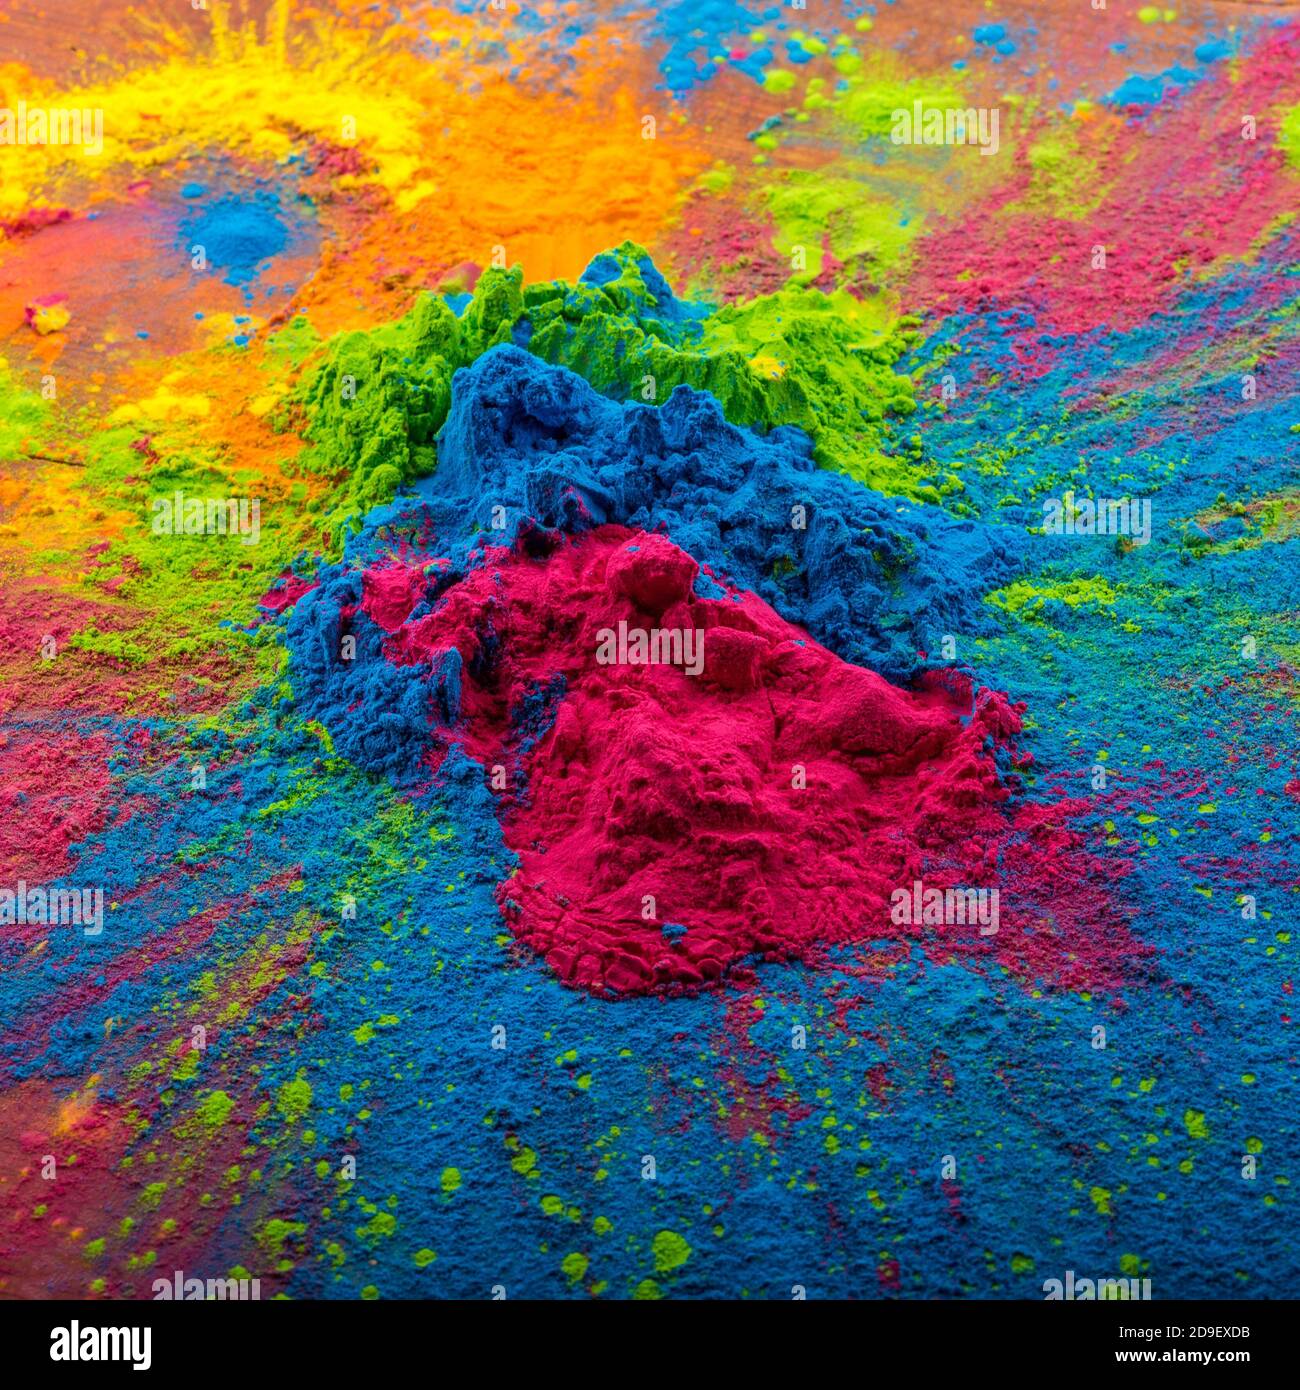 Happy Holi decoration, the indian festival.Top view of colorful holi powder  on dark background. Stock Photo